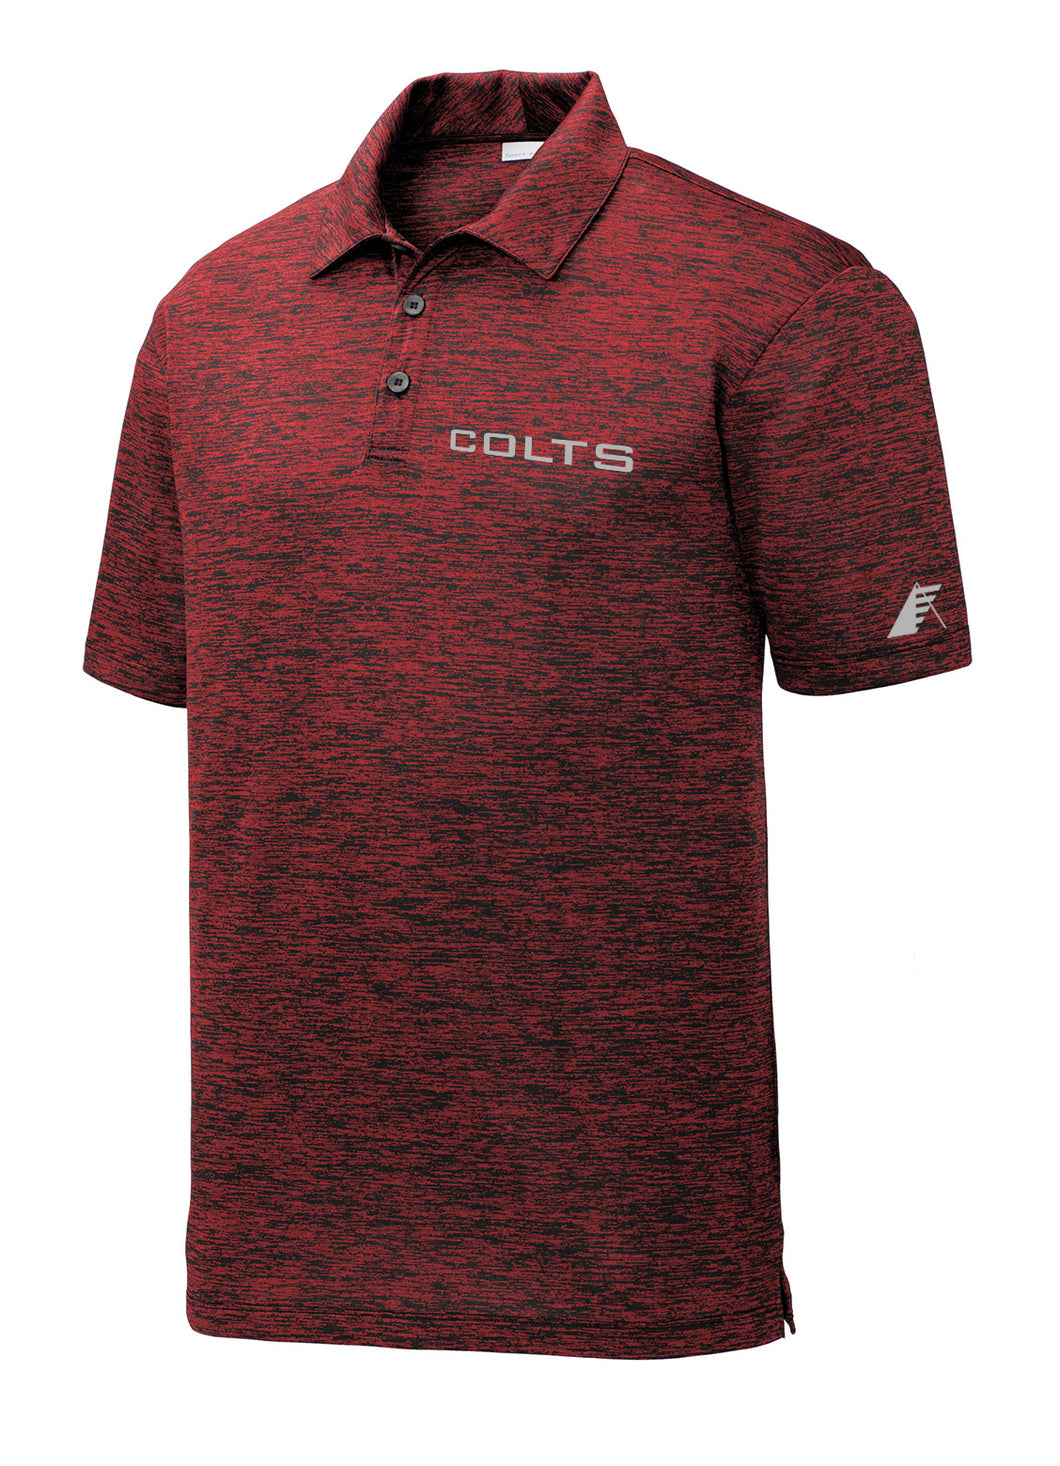 Colts Red Heather Polo